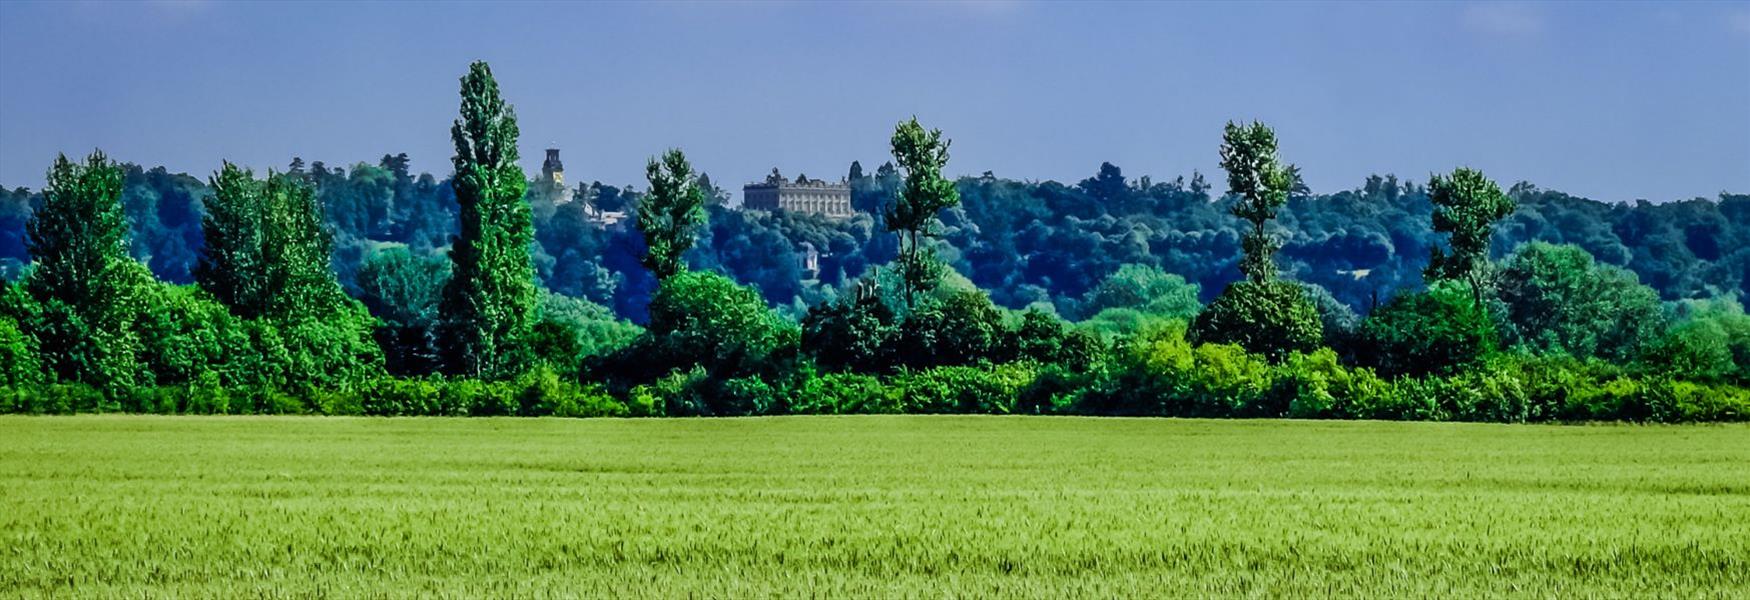 Views of Cliveden from Maidenhead